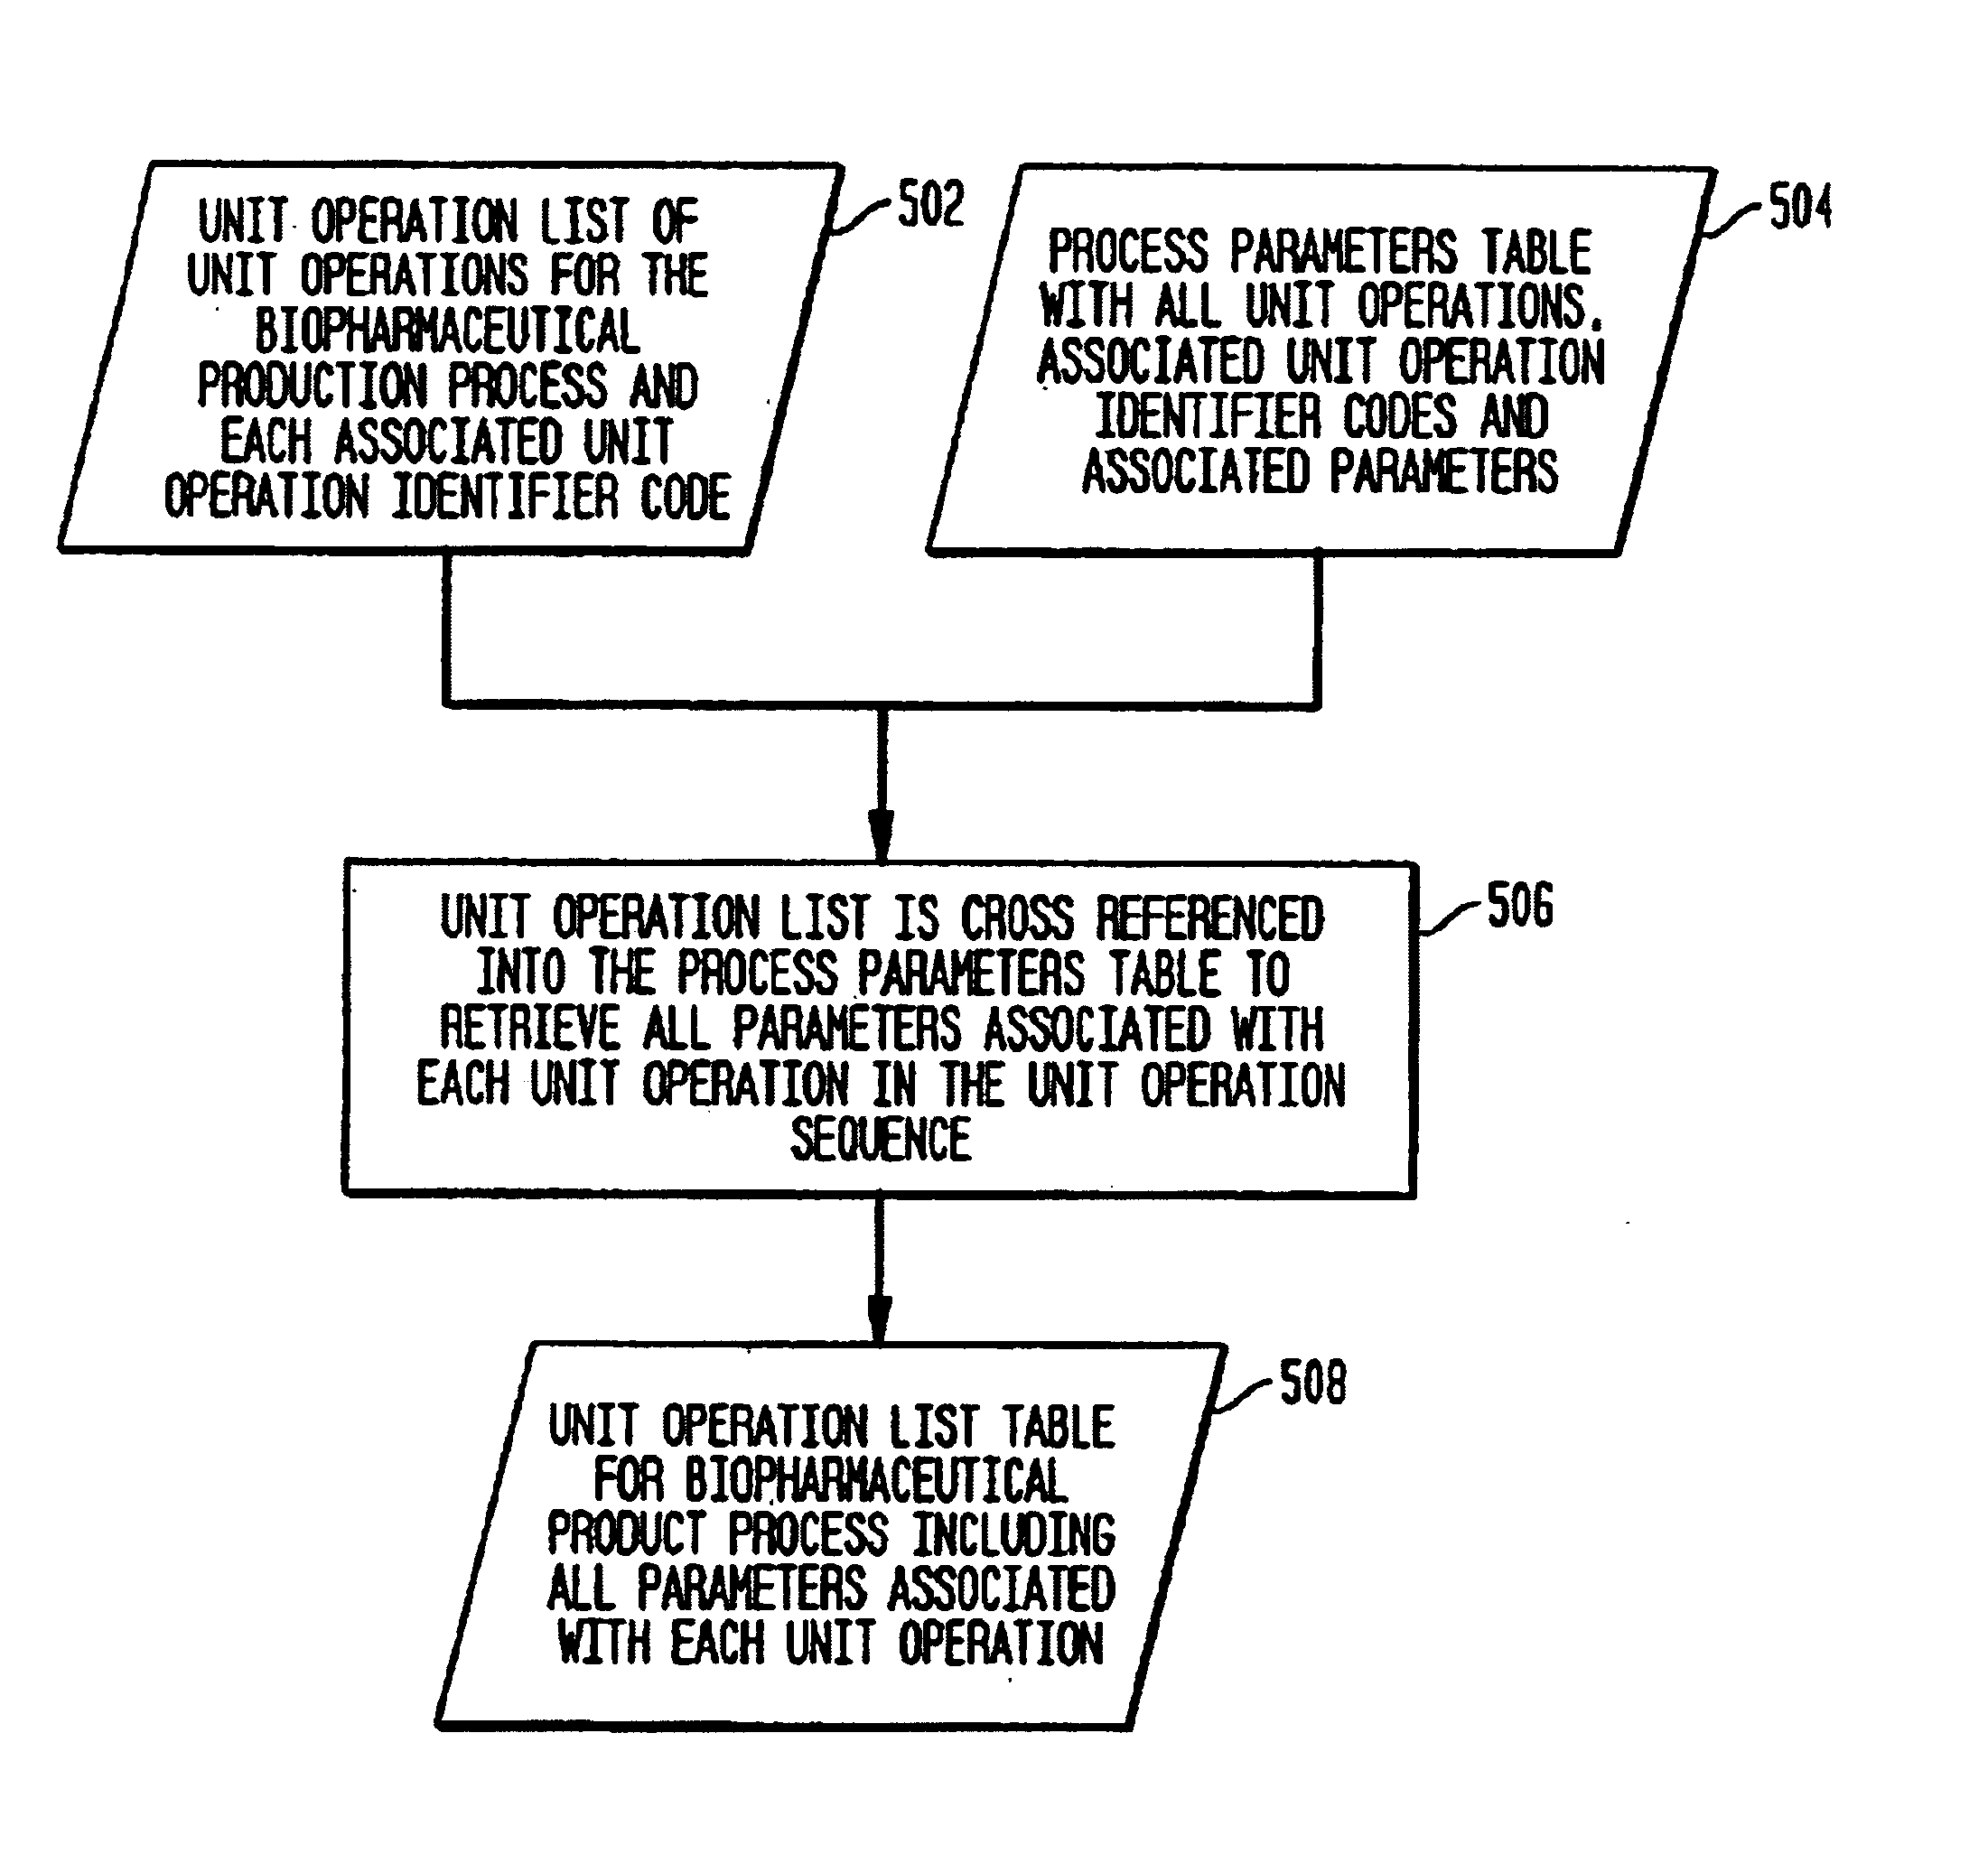 Method for scheduling solution preparation in biopharmaceutical batch process manufacturing